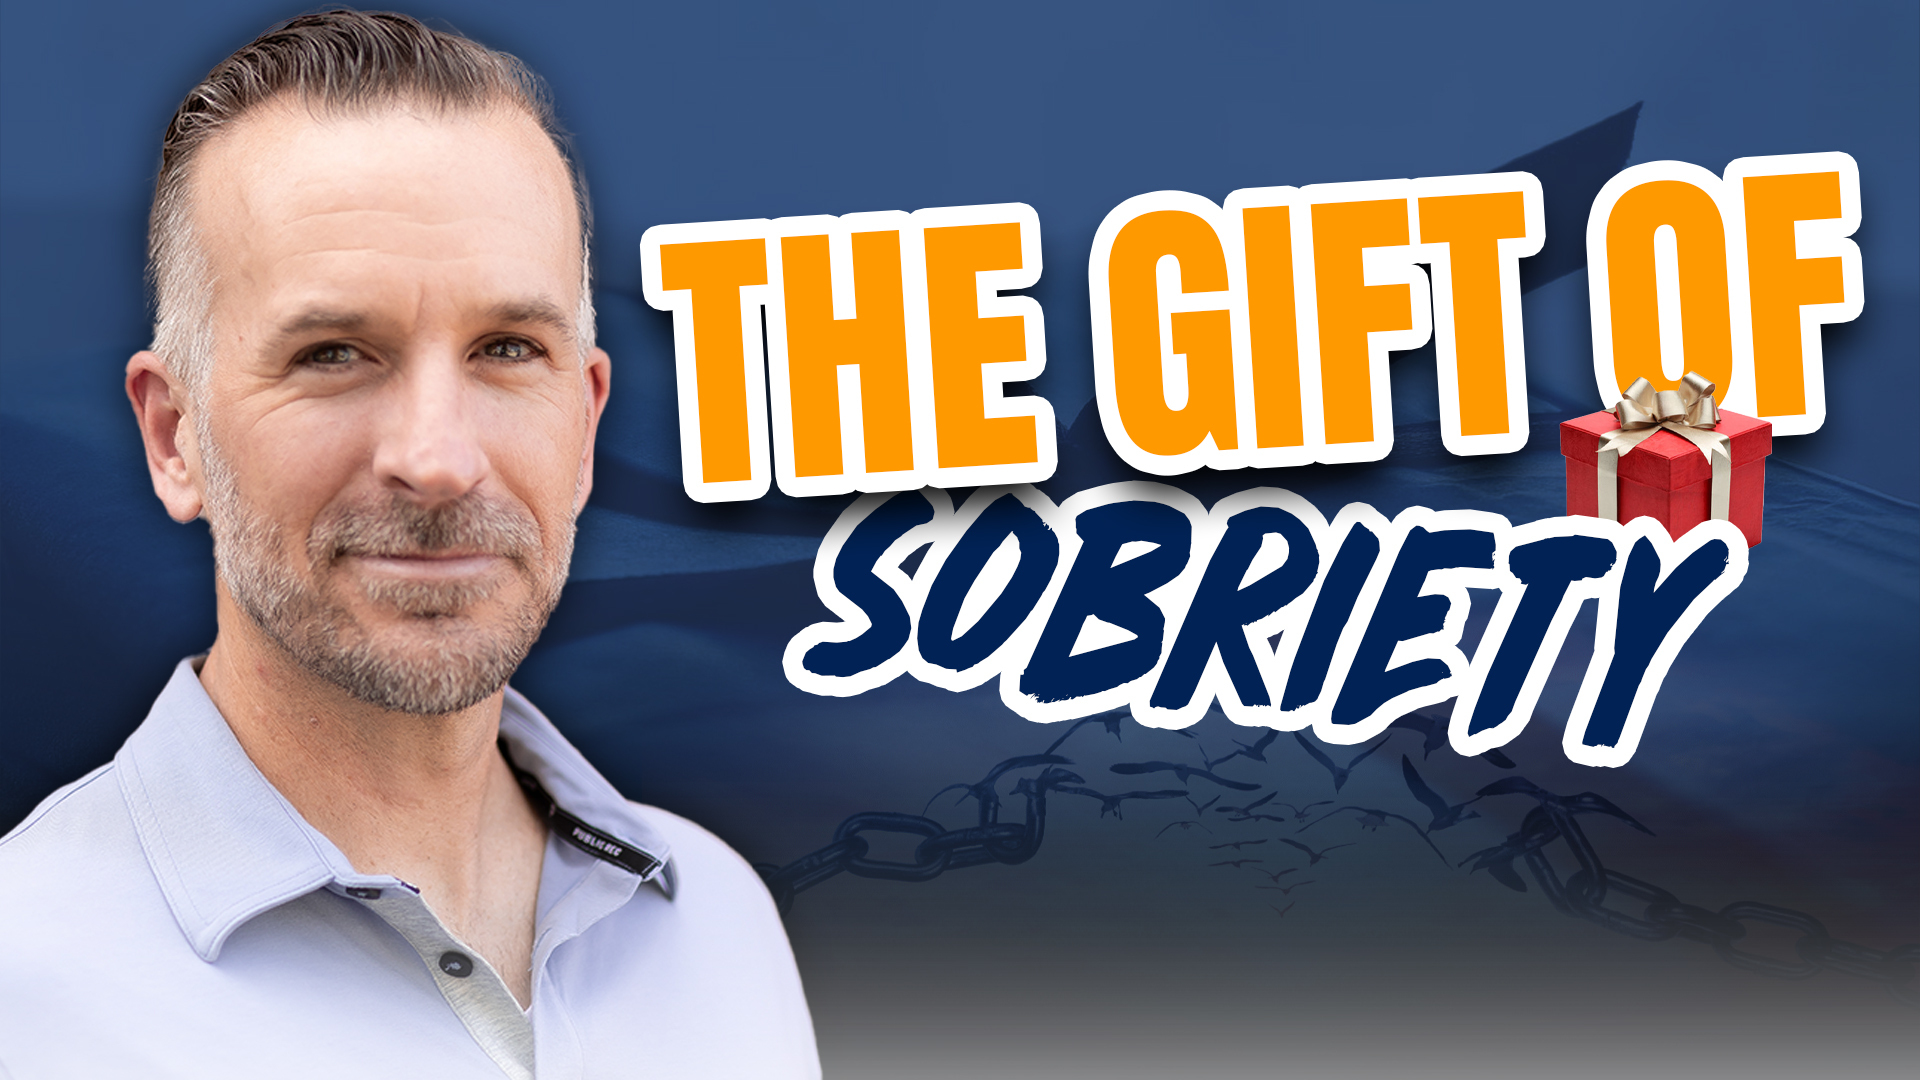 Flow Over Fear: The Gift of Sobriety